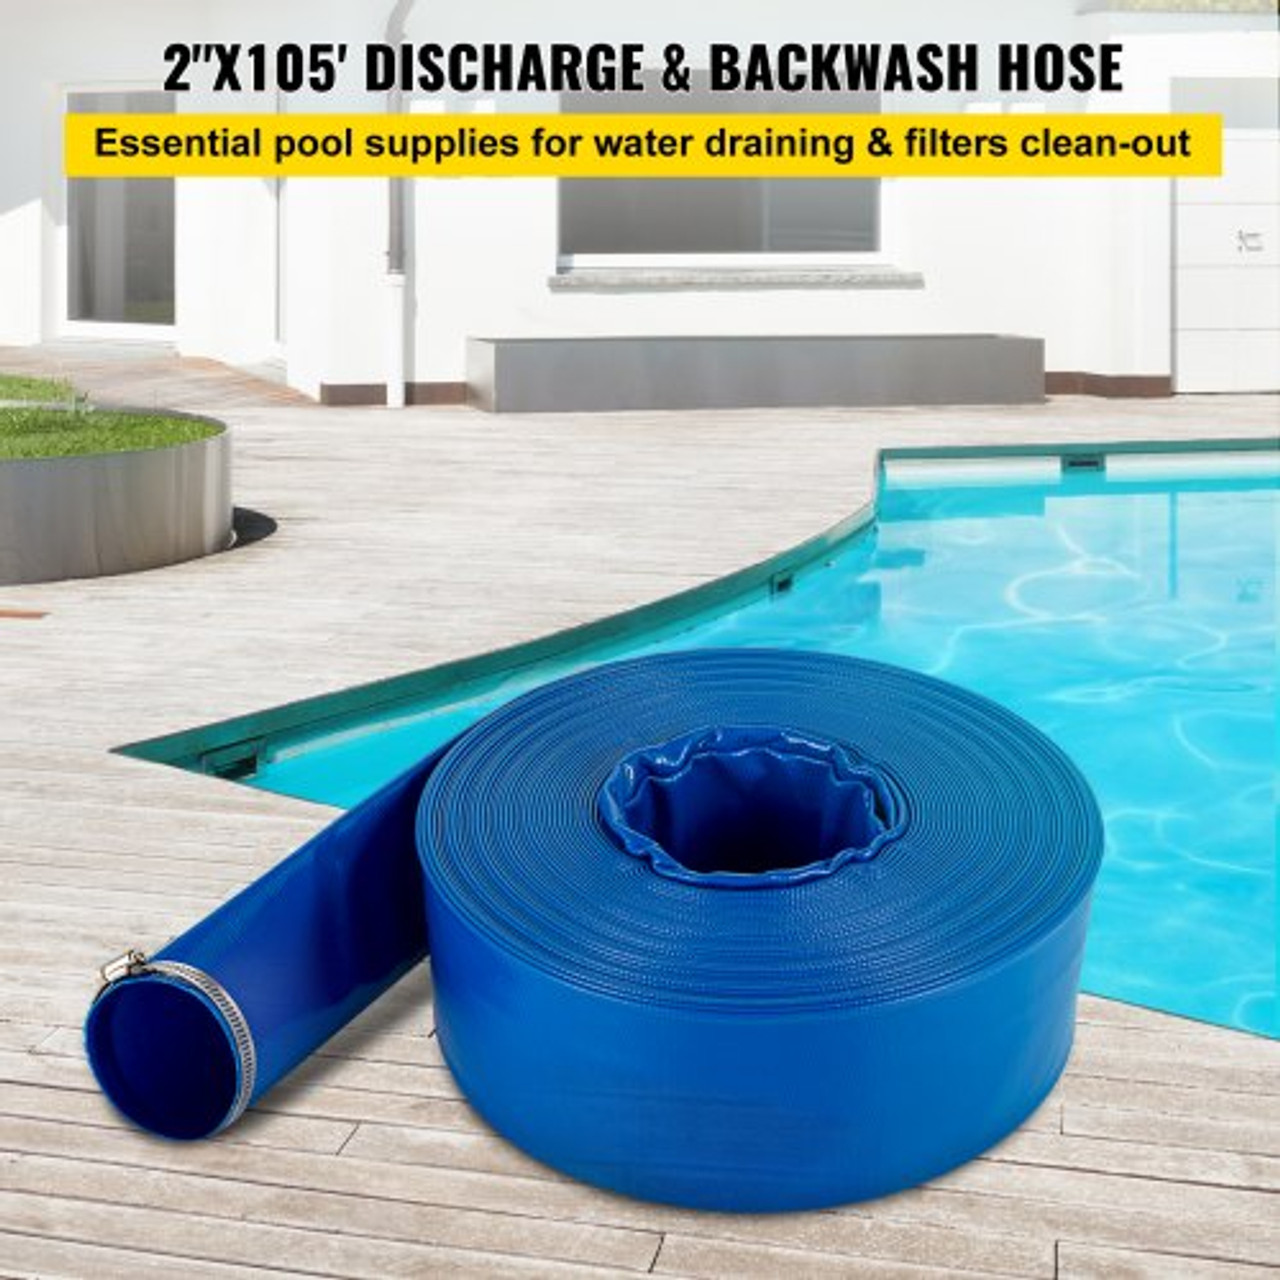 Discharge Hose, 2" x 105', PVC Fabric Lay Flat Hose, Heavy Duty Backwash Drain Hose with Clamps, Weather-proof & Burst-proof, Ideal for Swimming Pool & Water Transfer, Blue